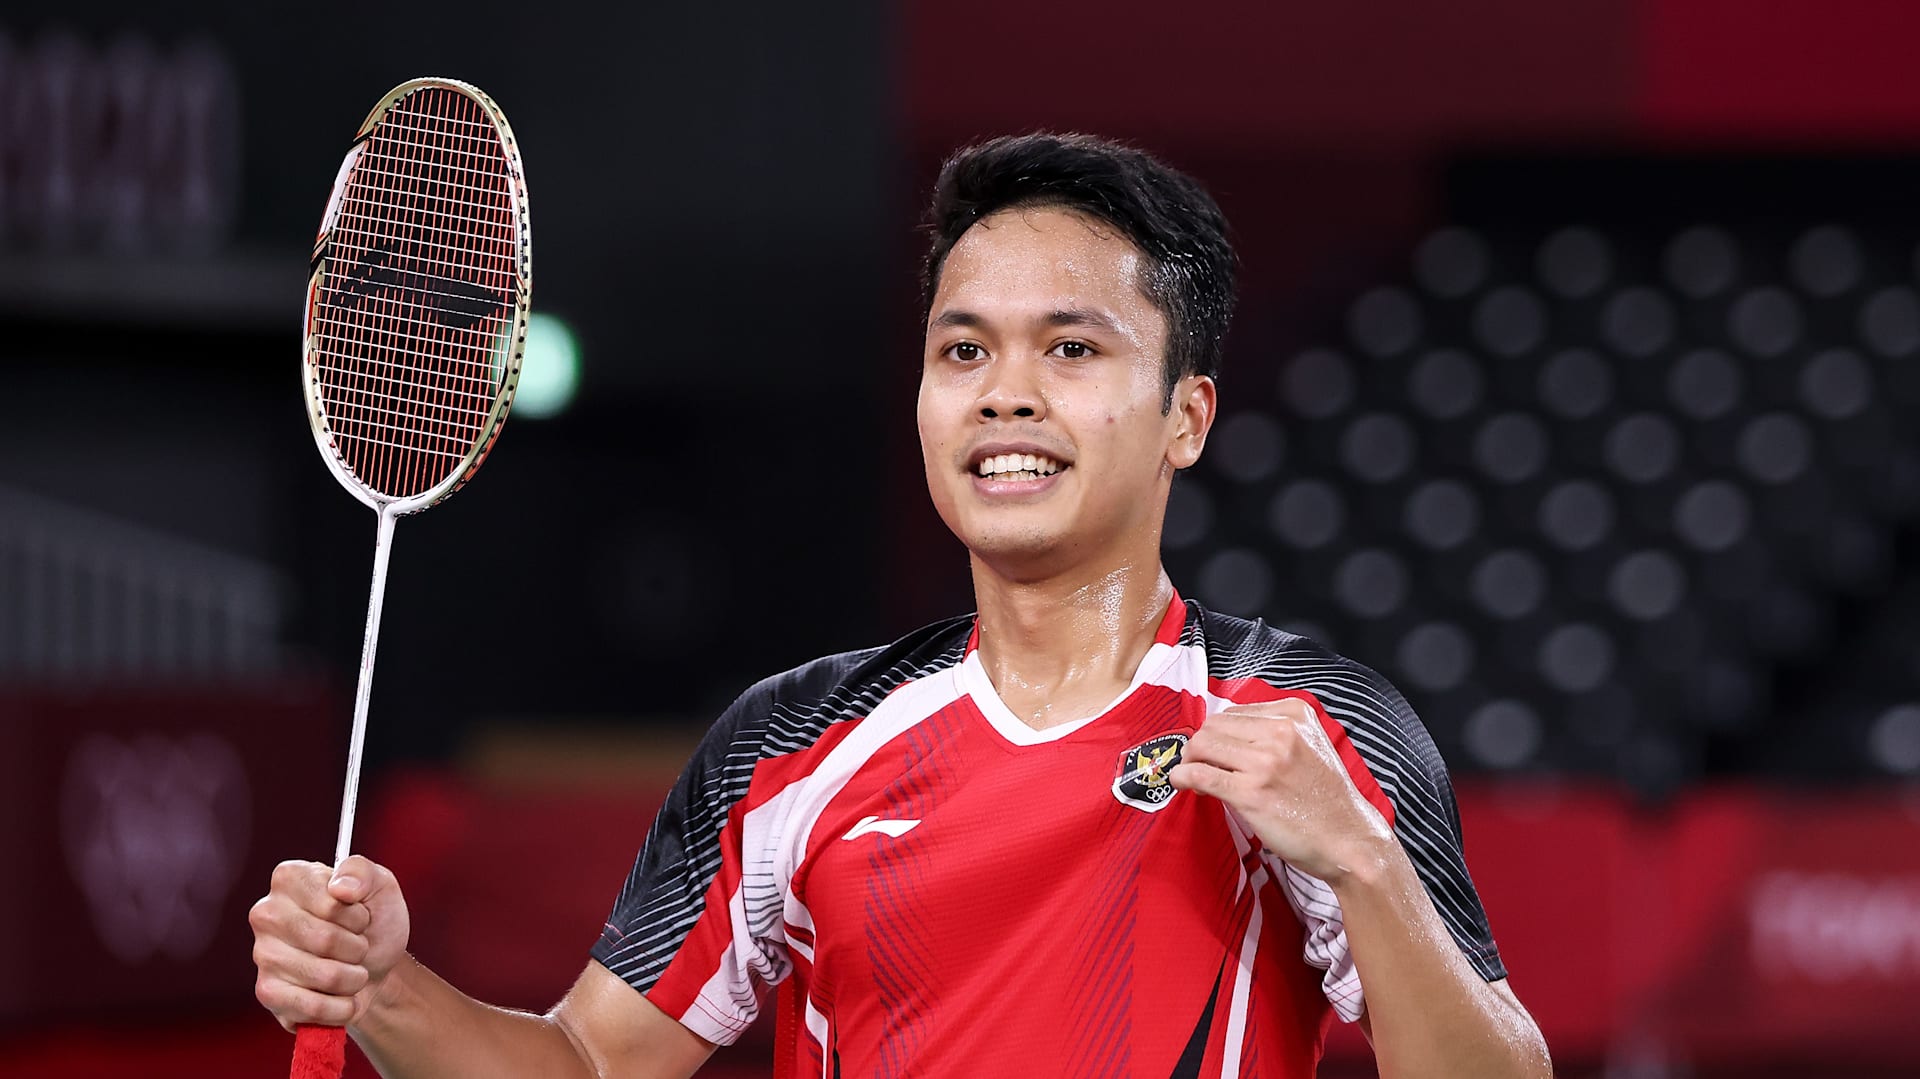 Badminton - 2022 Singapore Open: Anthony Ginting wins men's title with  victory over Naraoka Kodai - Final result